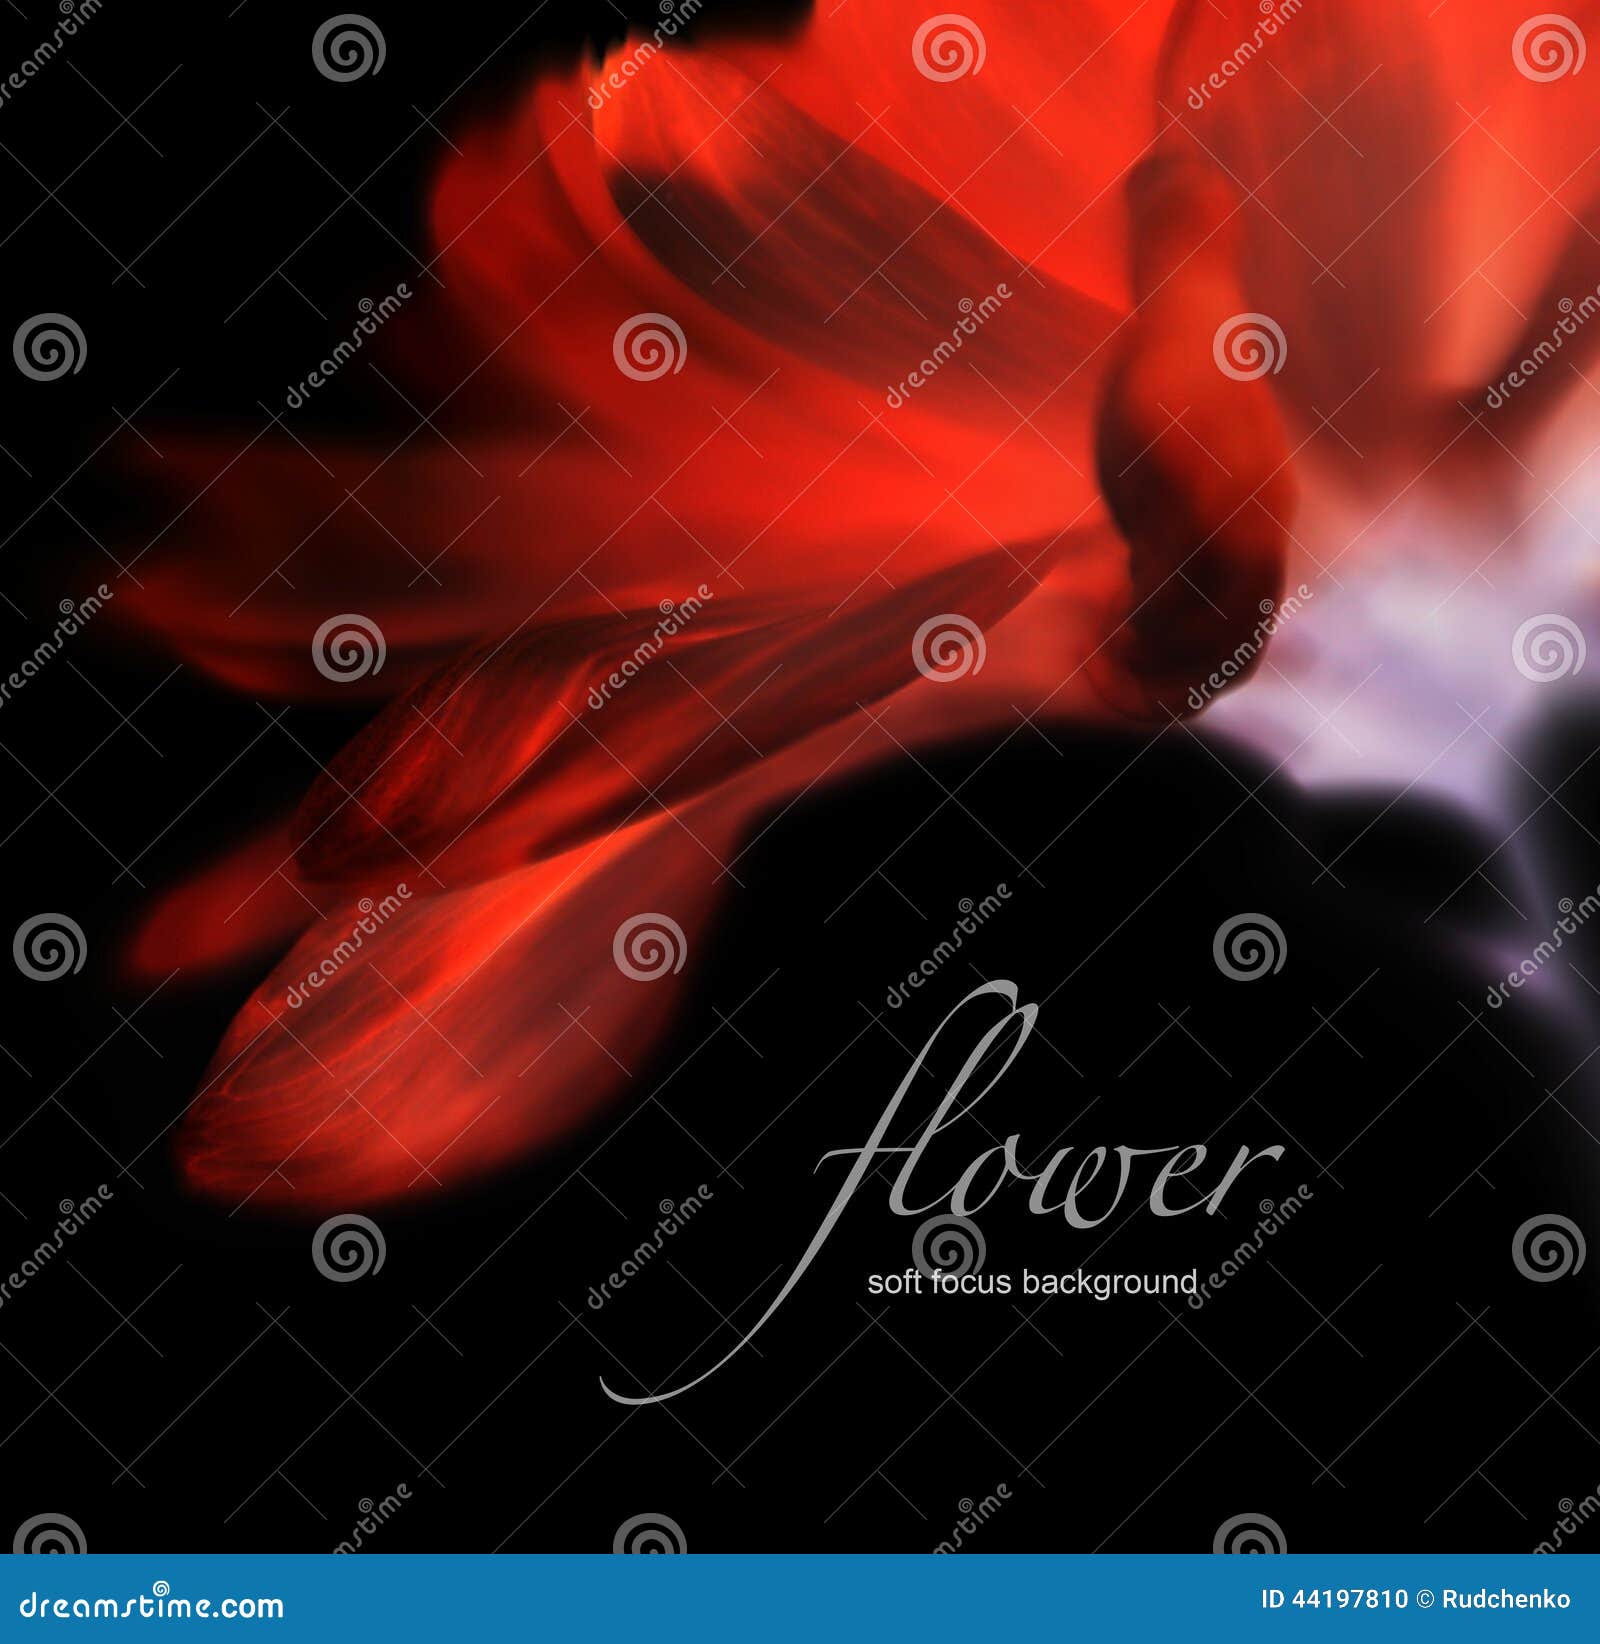 invert soft focus flower background with copy space.